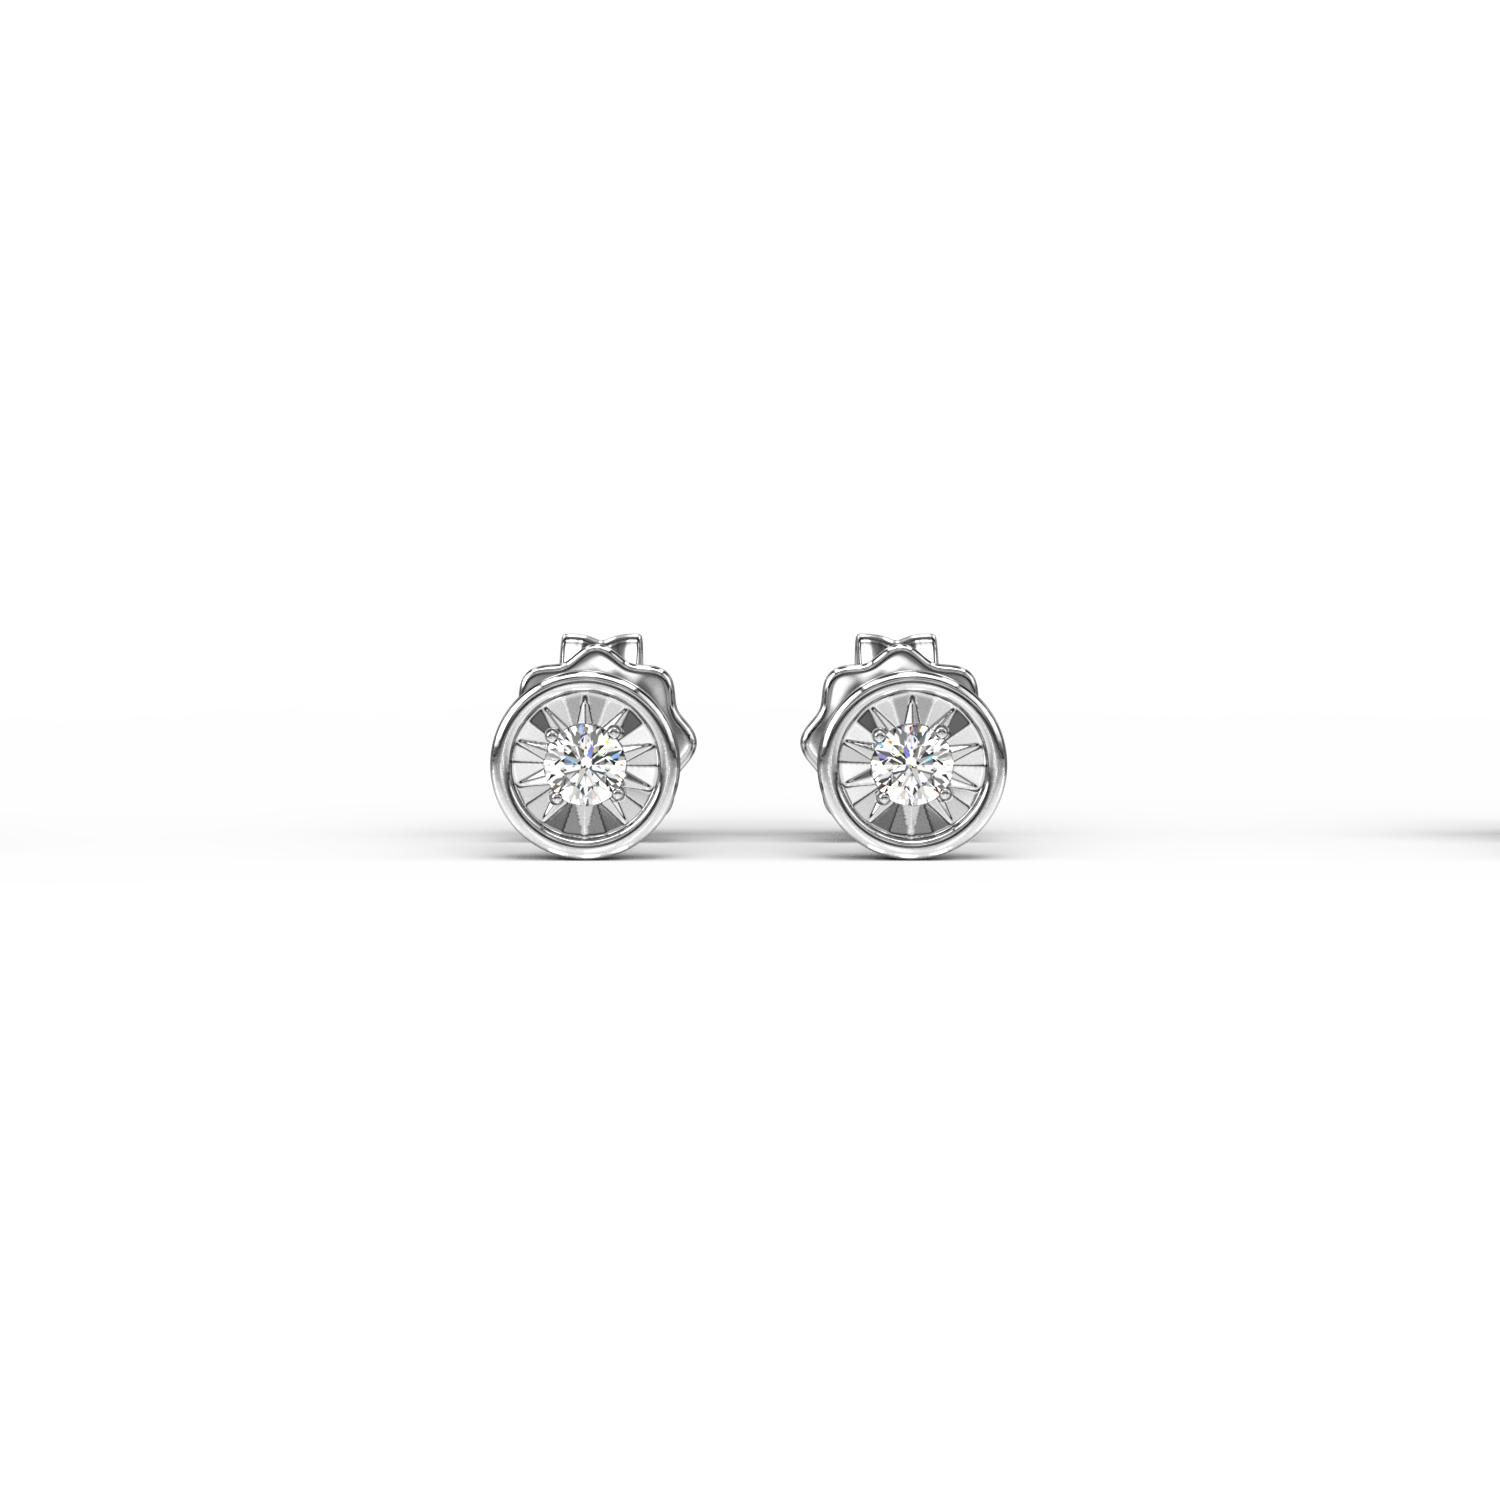 18K white gold earrings with 0.07ct diamonds